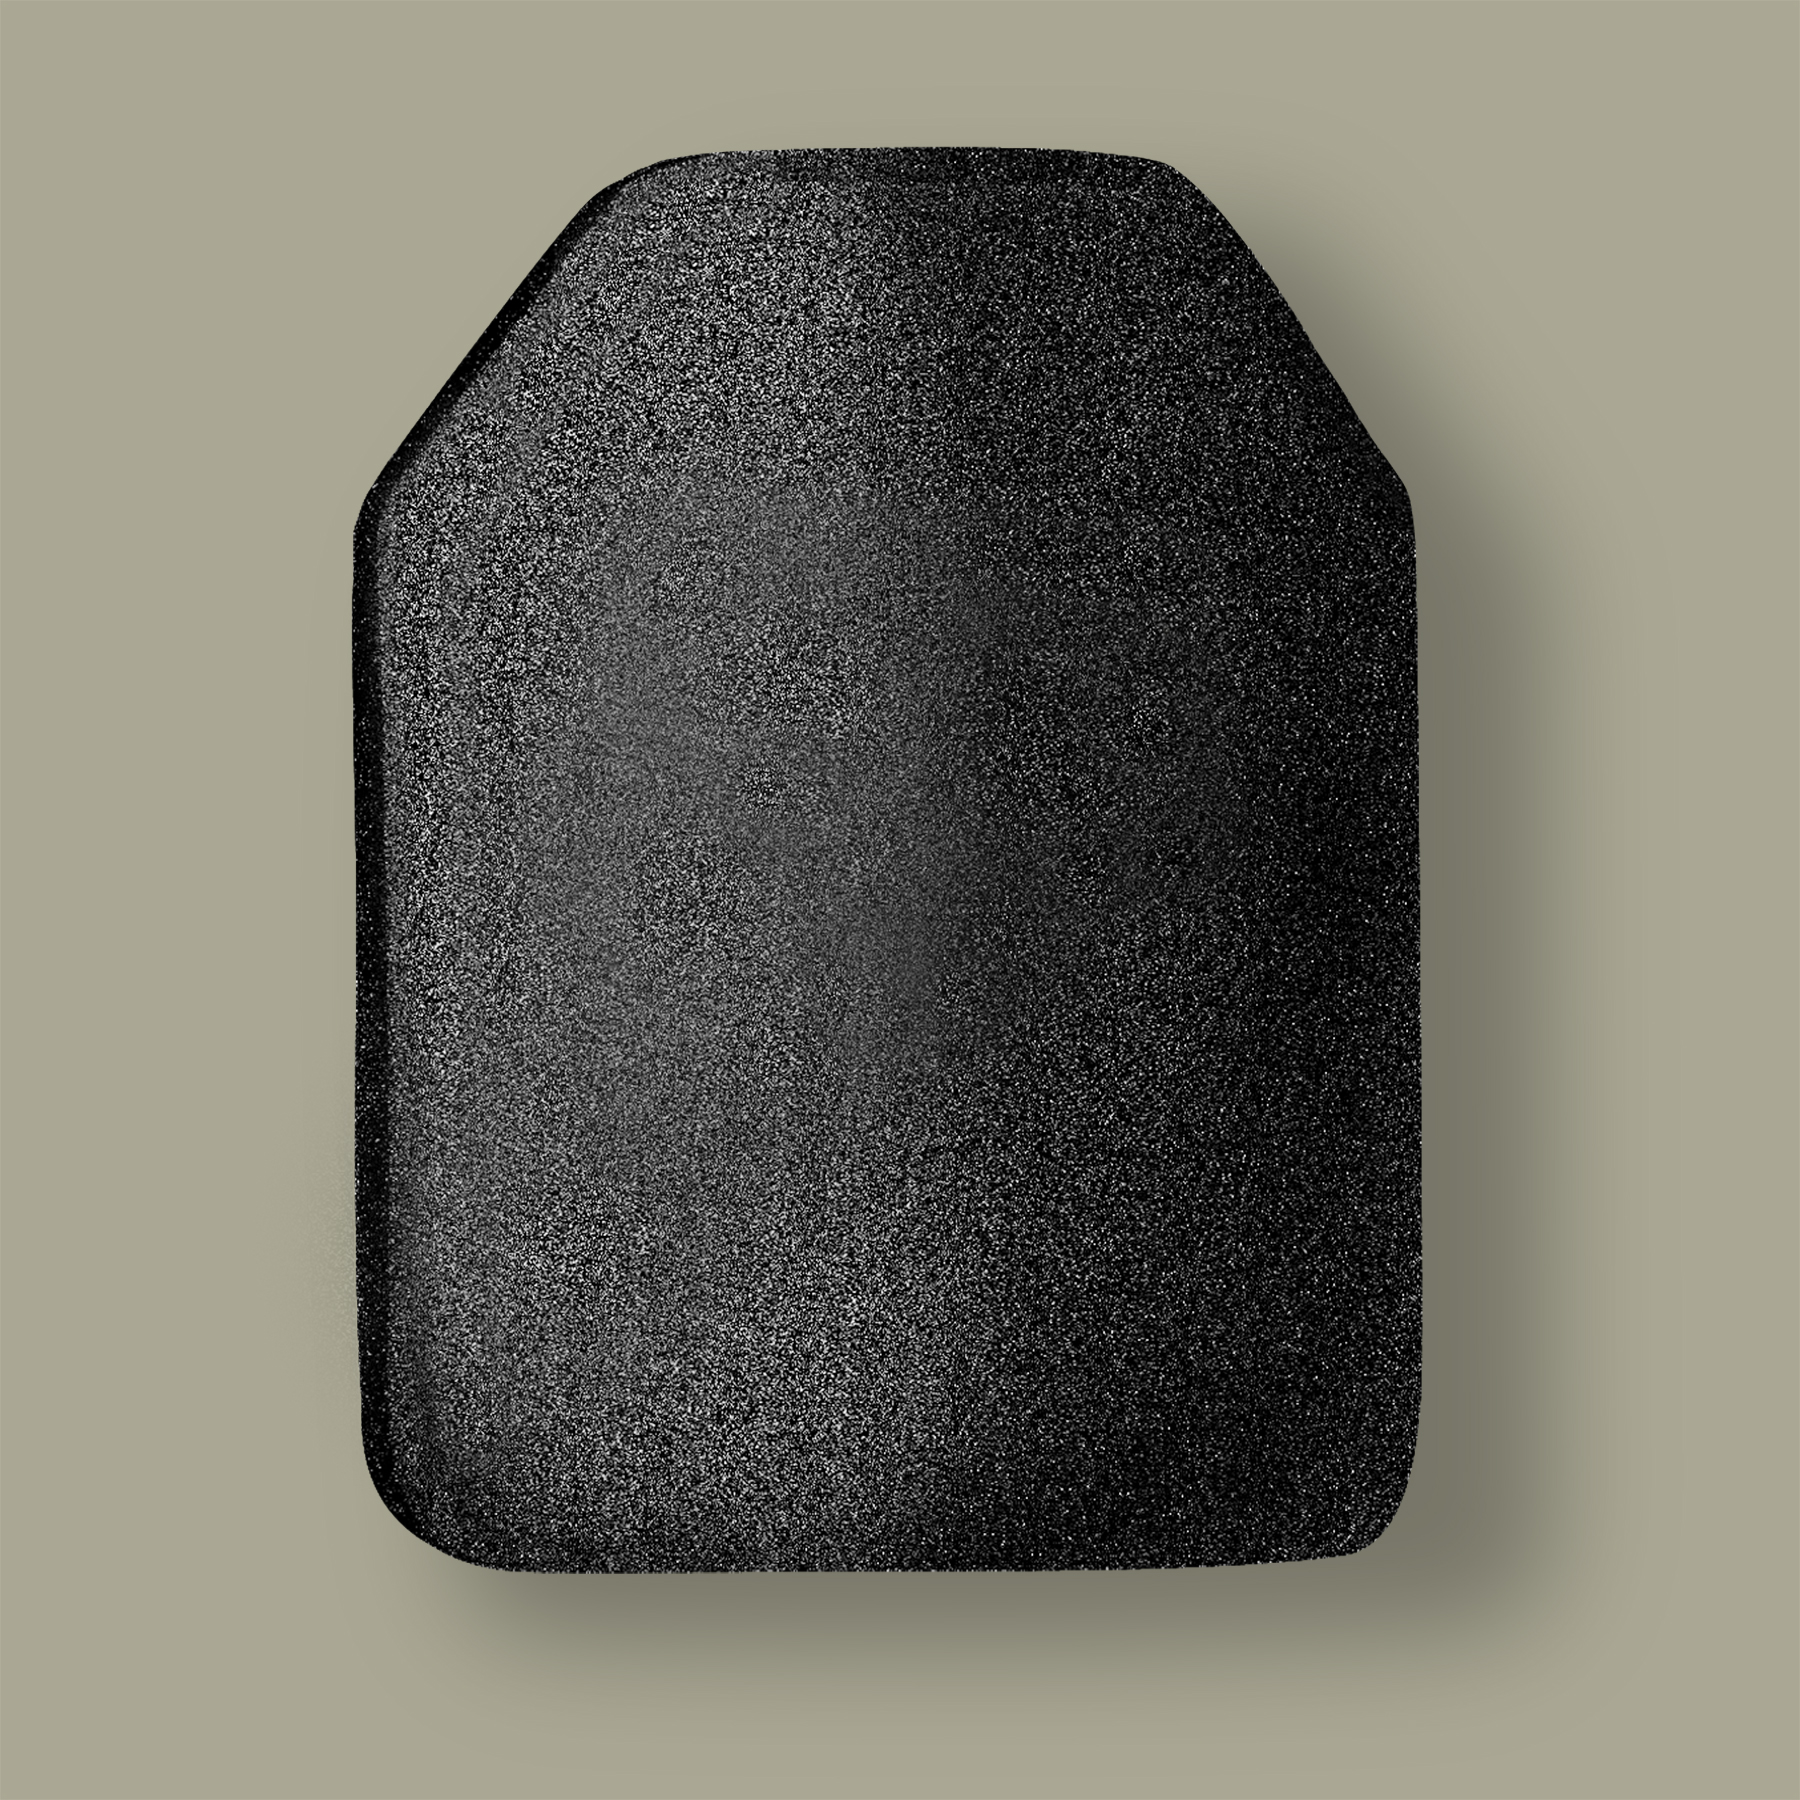 coated body armor plate